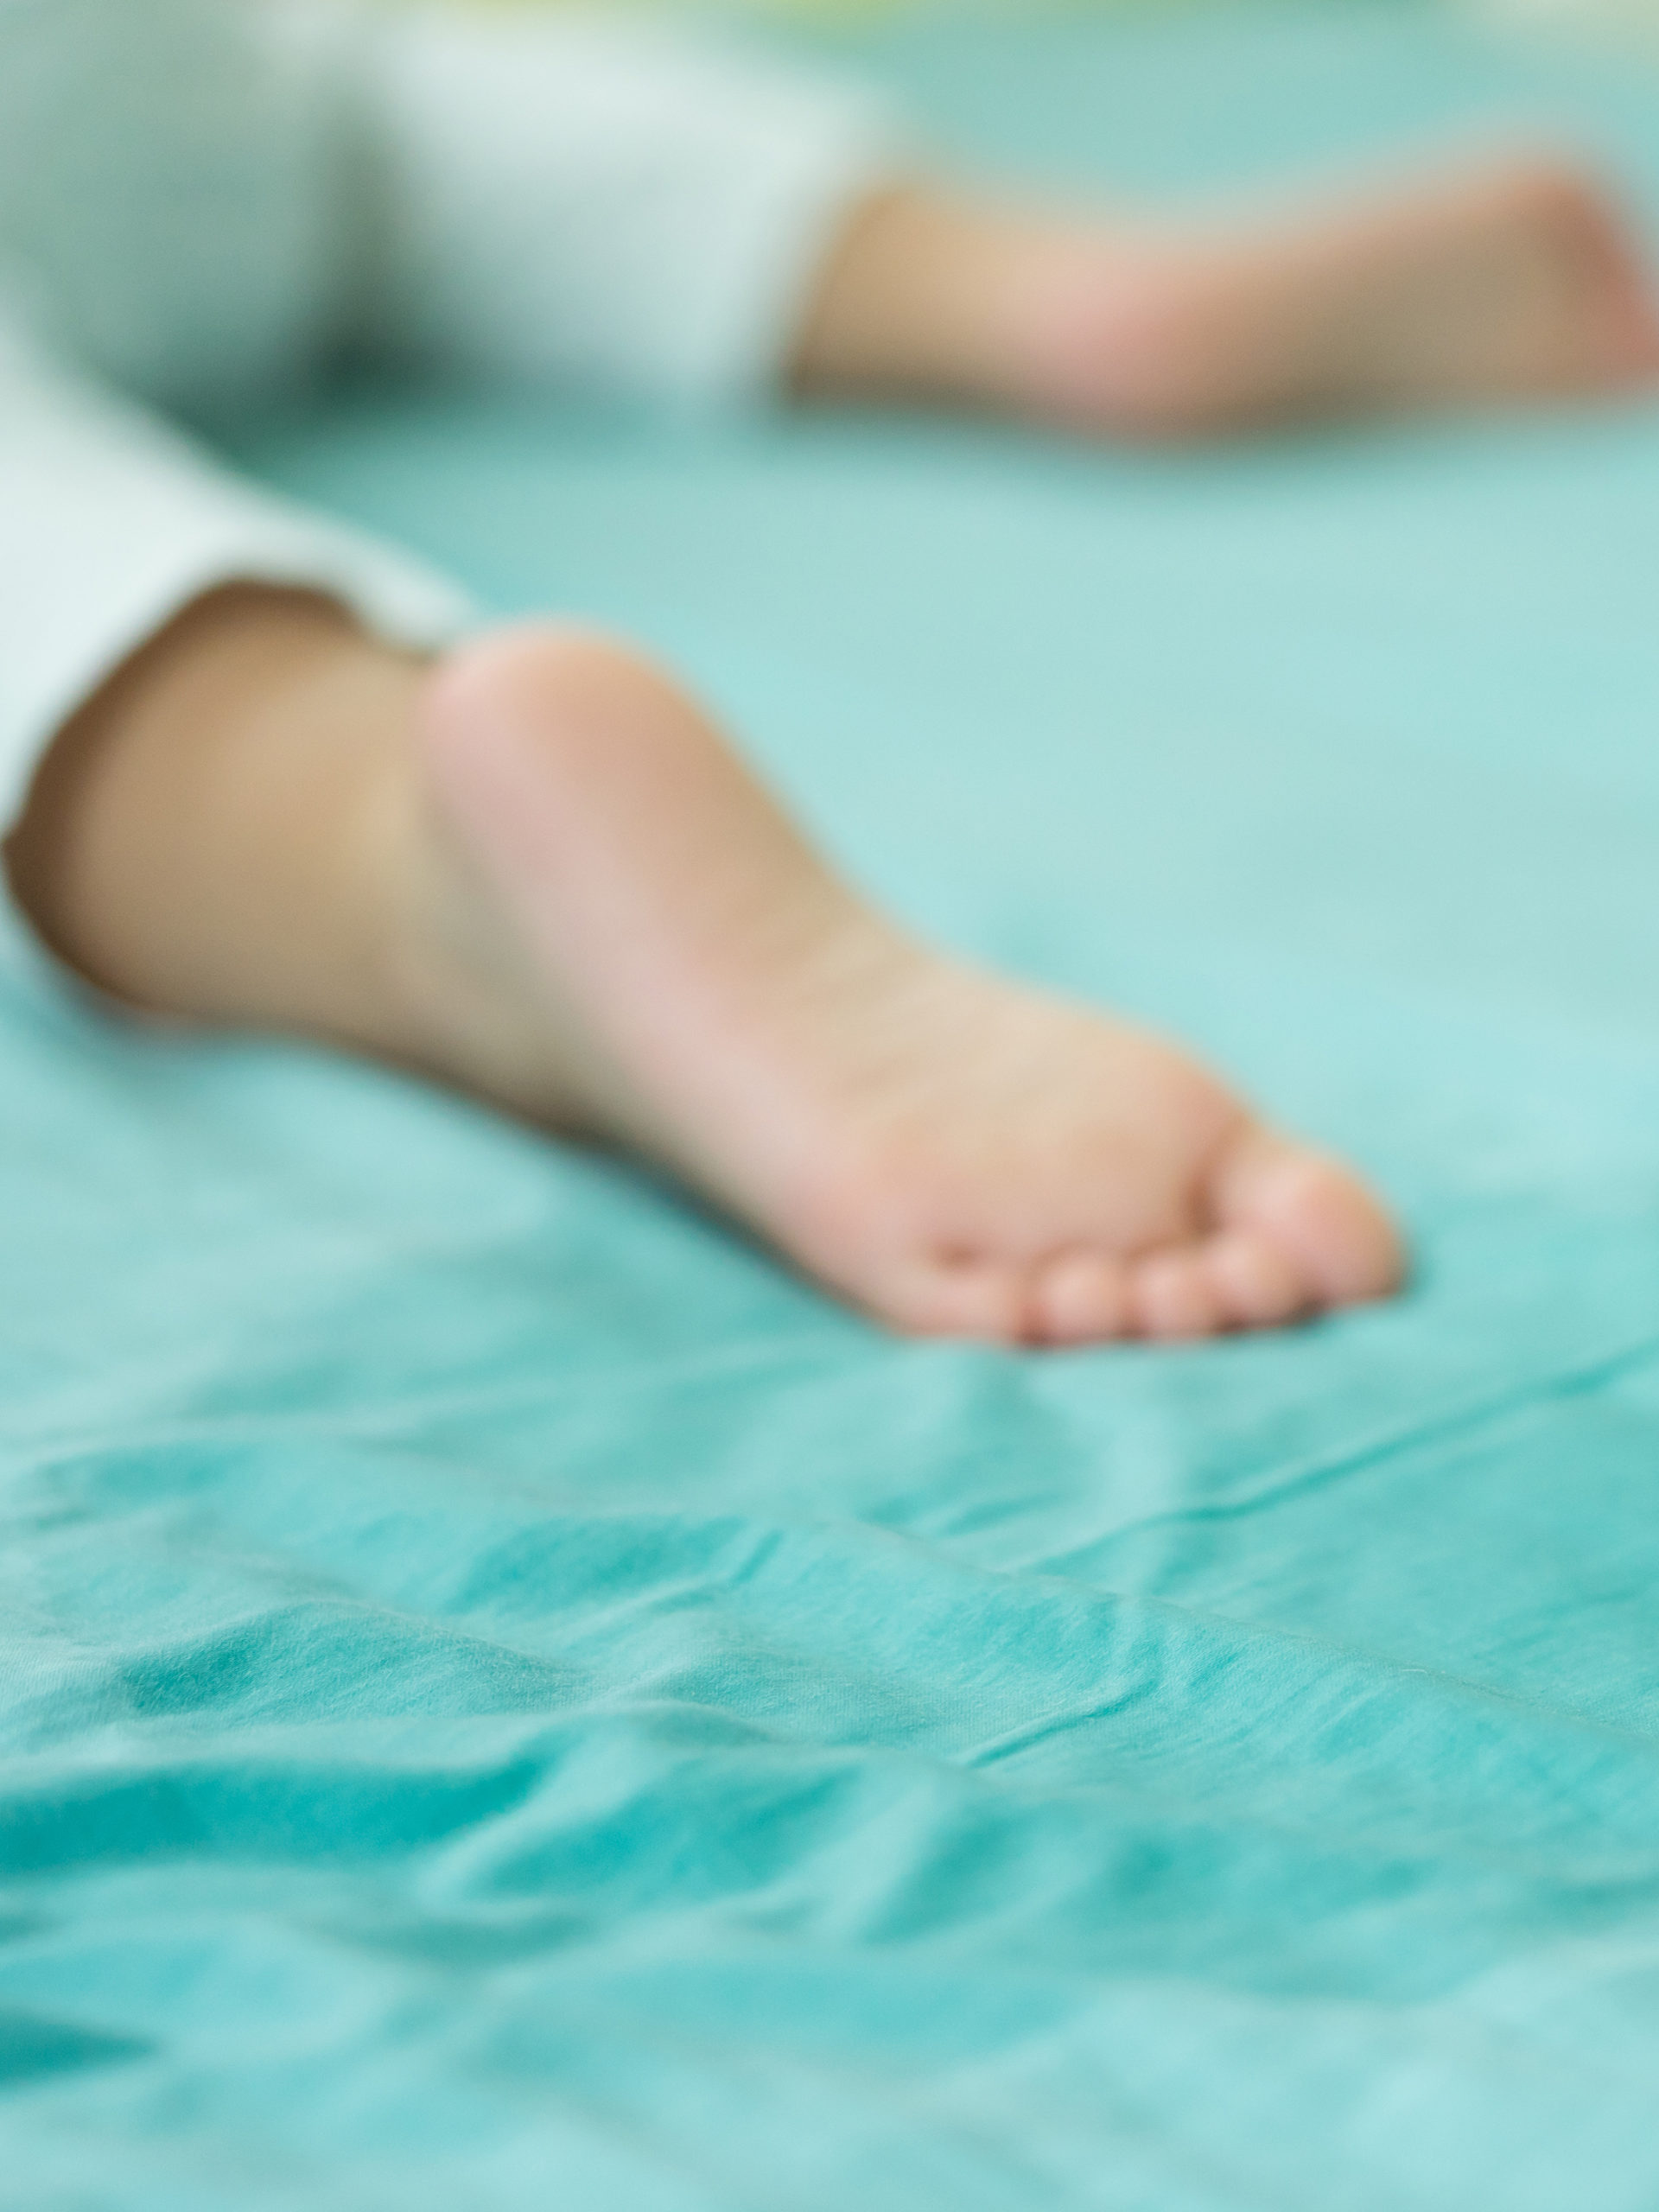 Bedwetting in children: What parents should know about nighttime enuresis